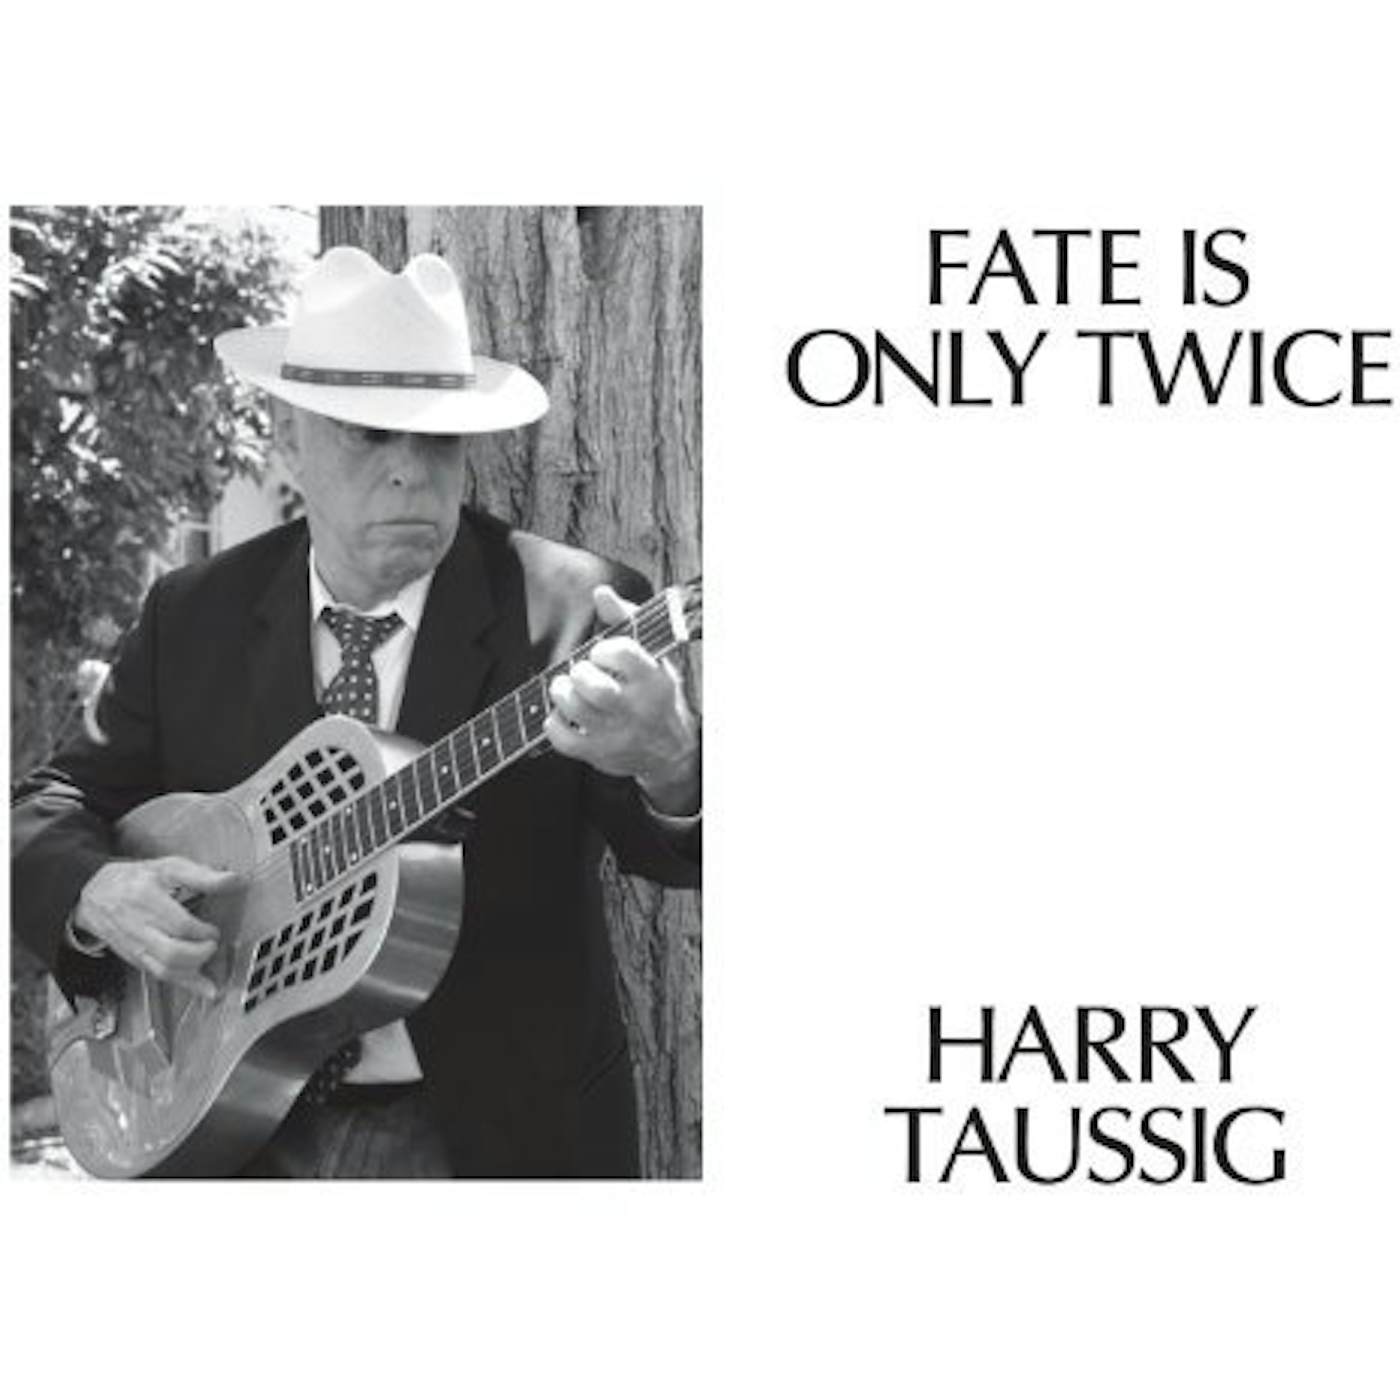 Harry Taussig Fate Is Only Twice Vinyl Record